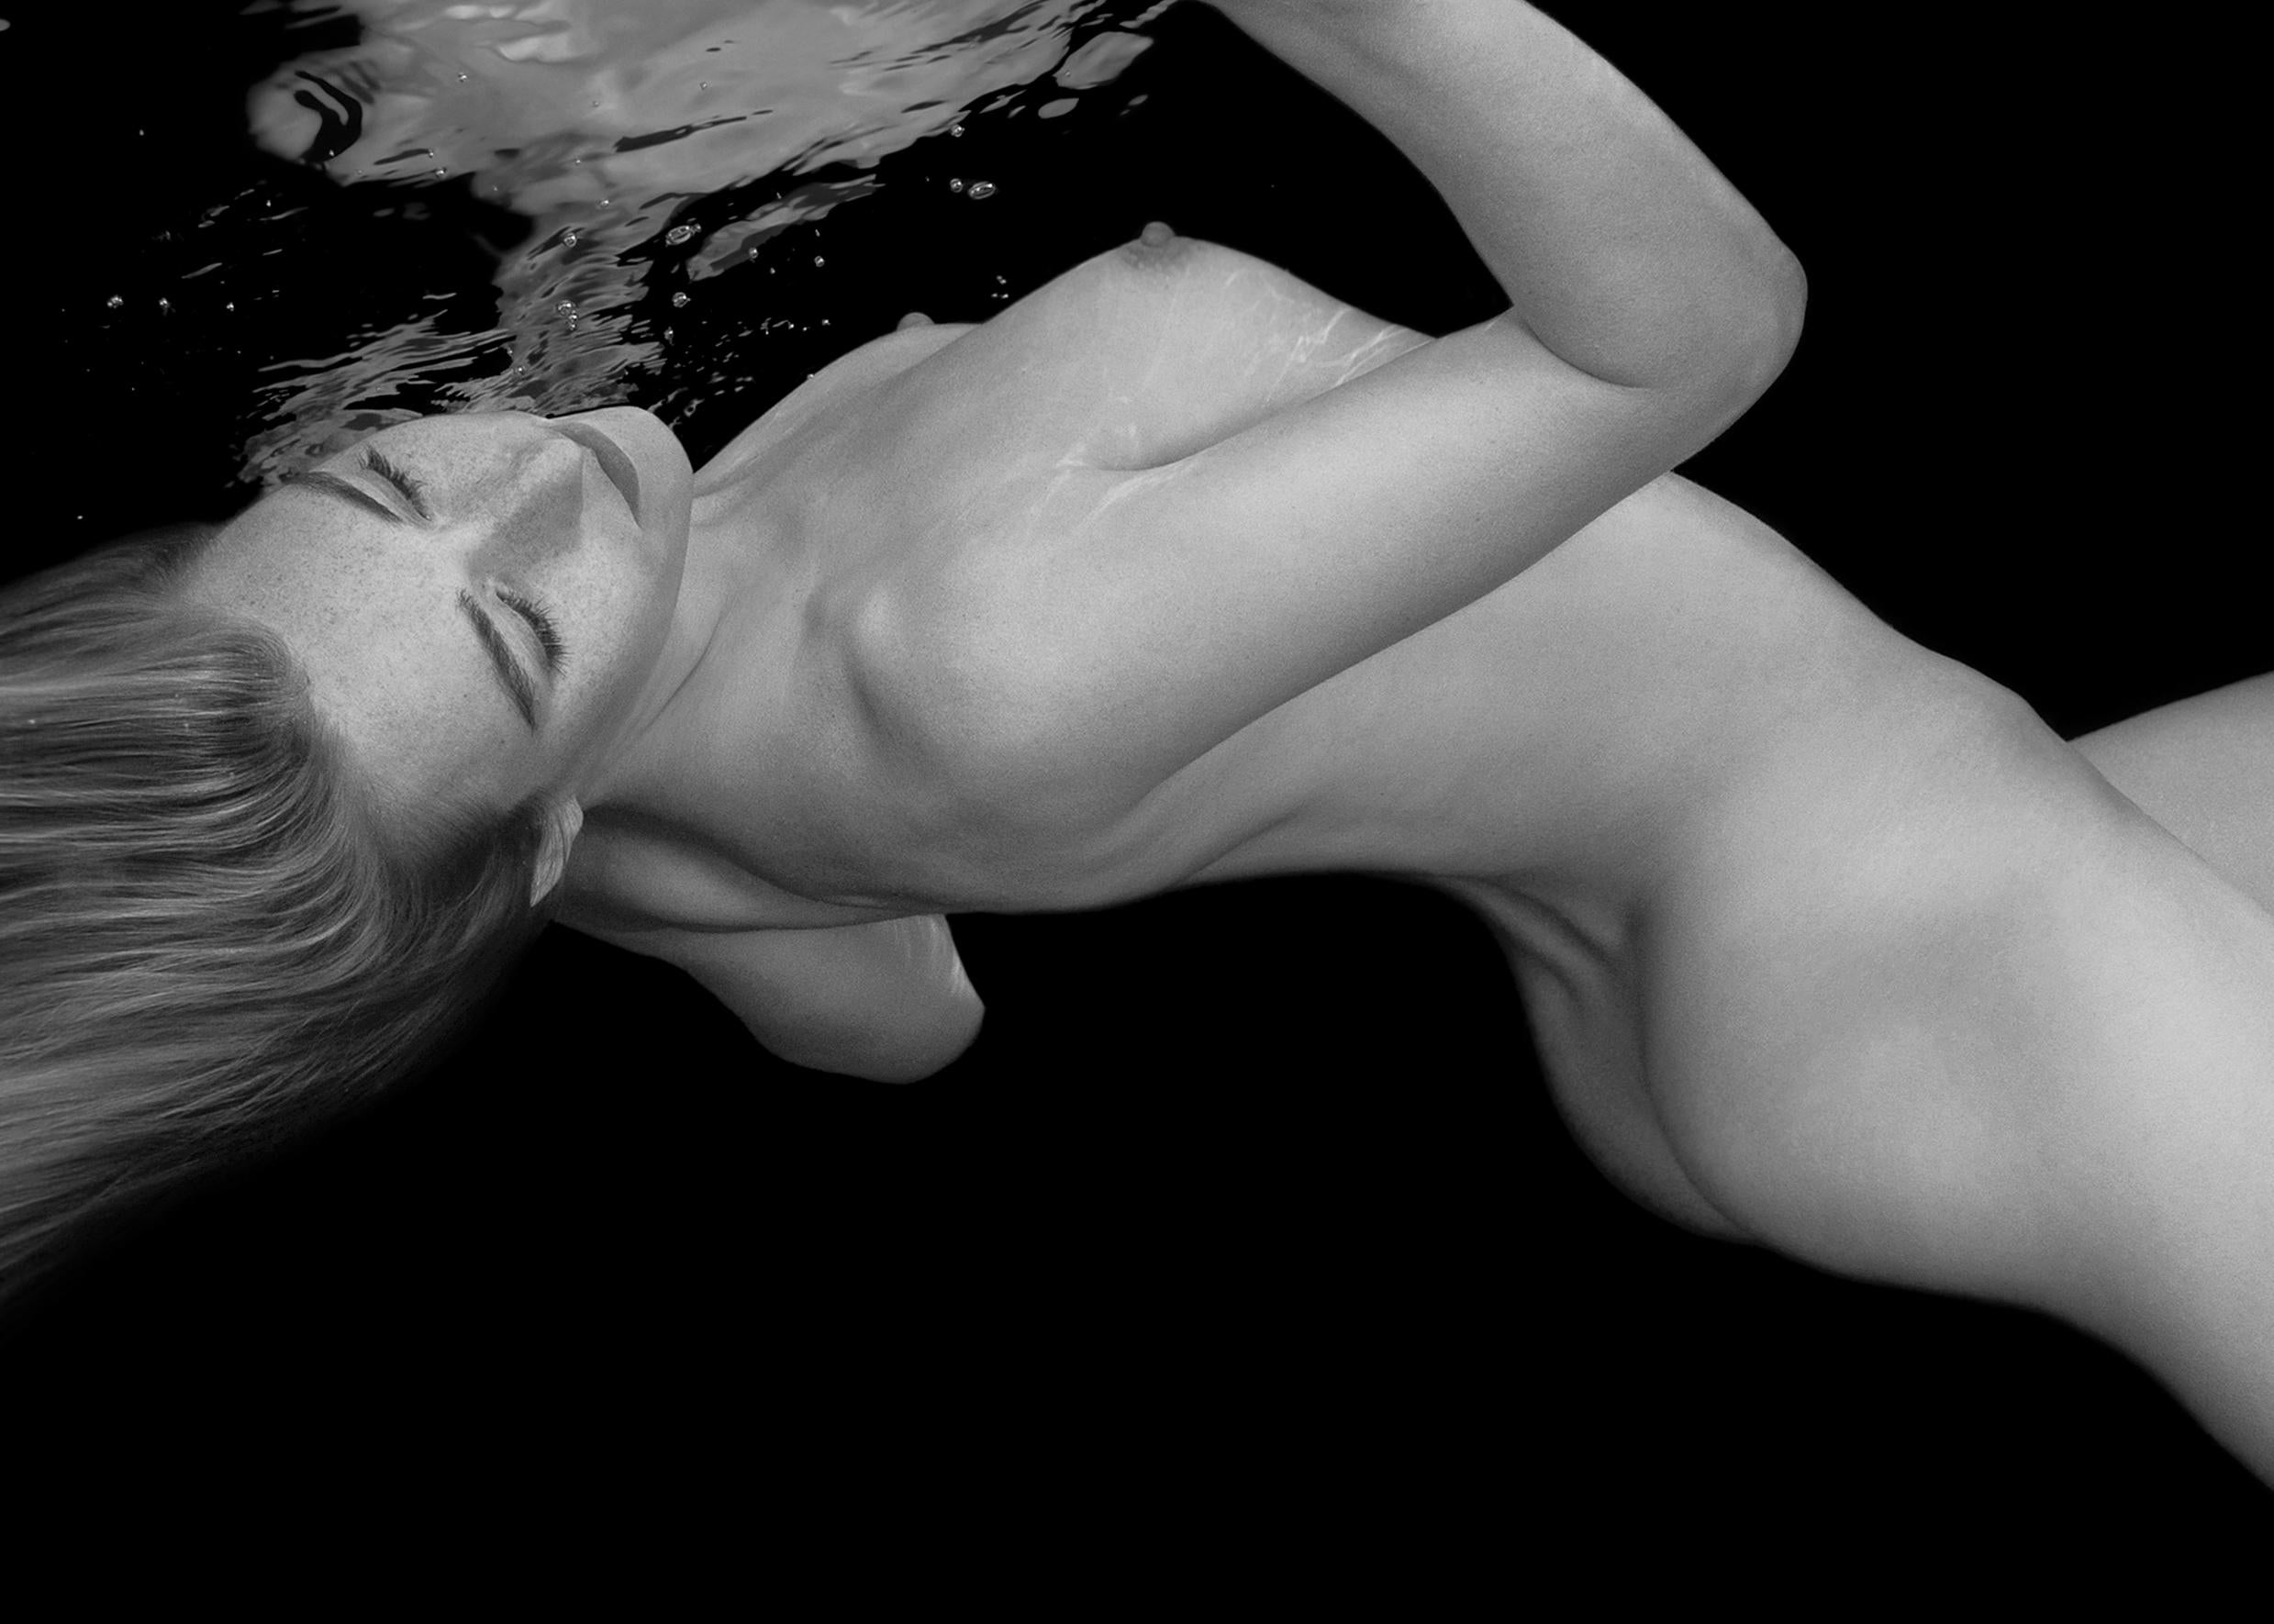 The Touch - underwater black & white nude photograph - archival pigment 35x52